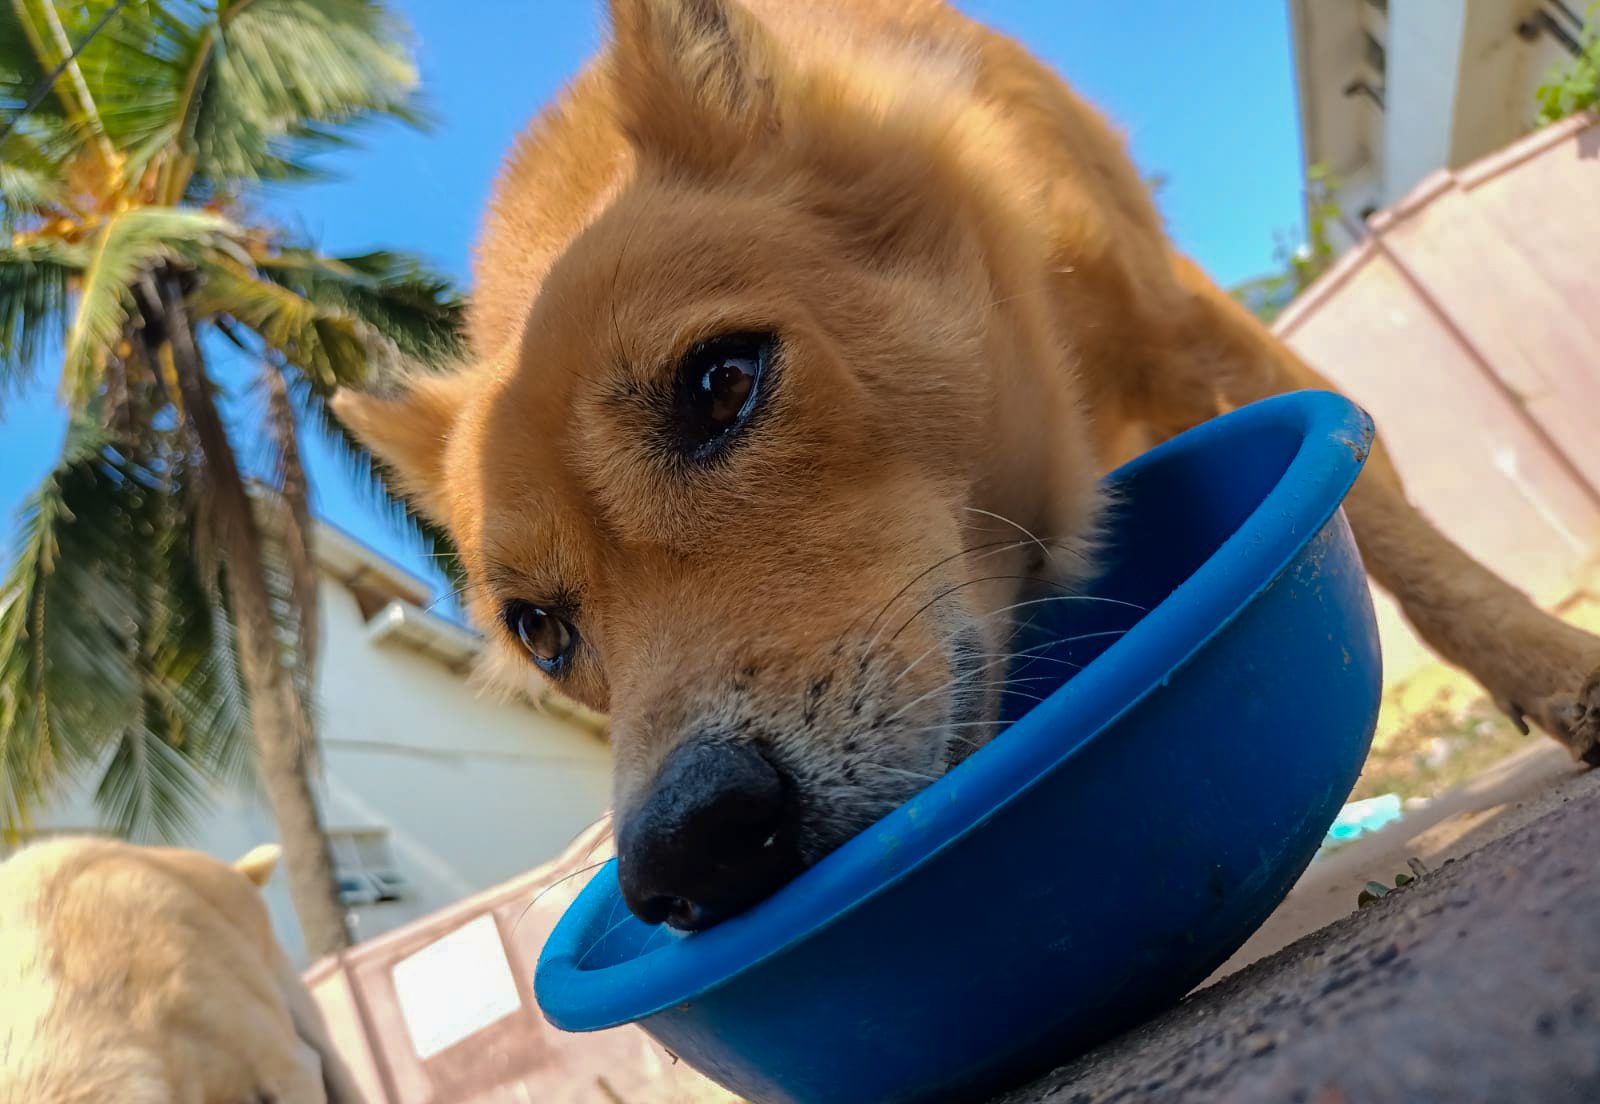 Street dog looking up from a bowl of food.